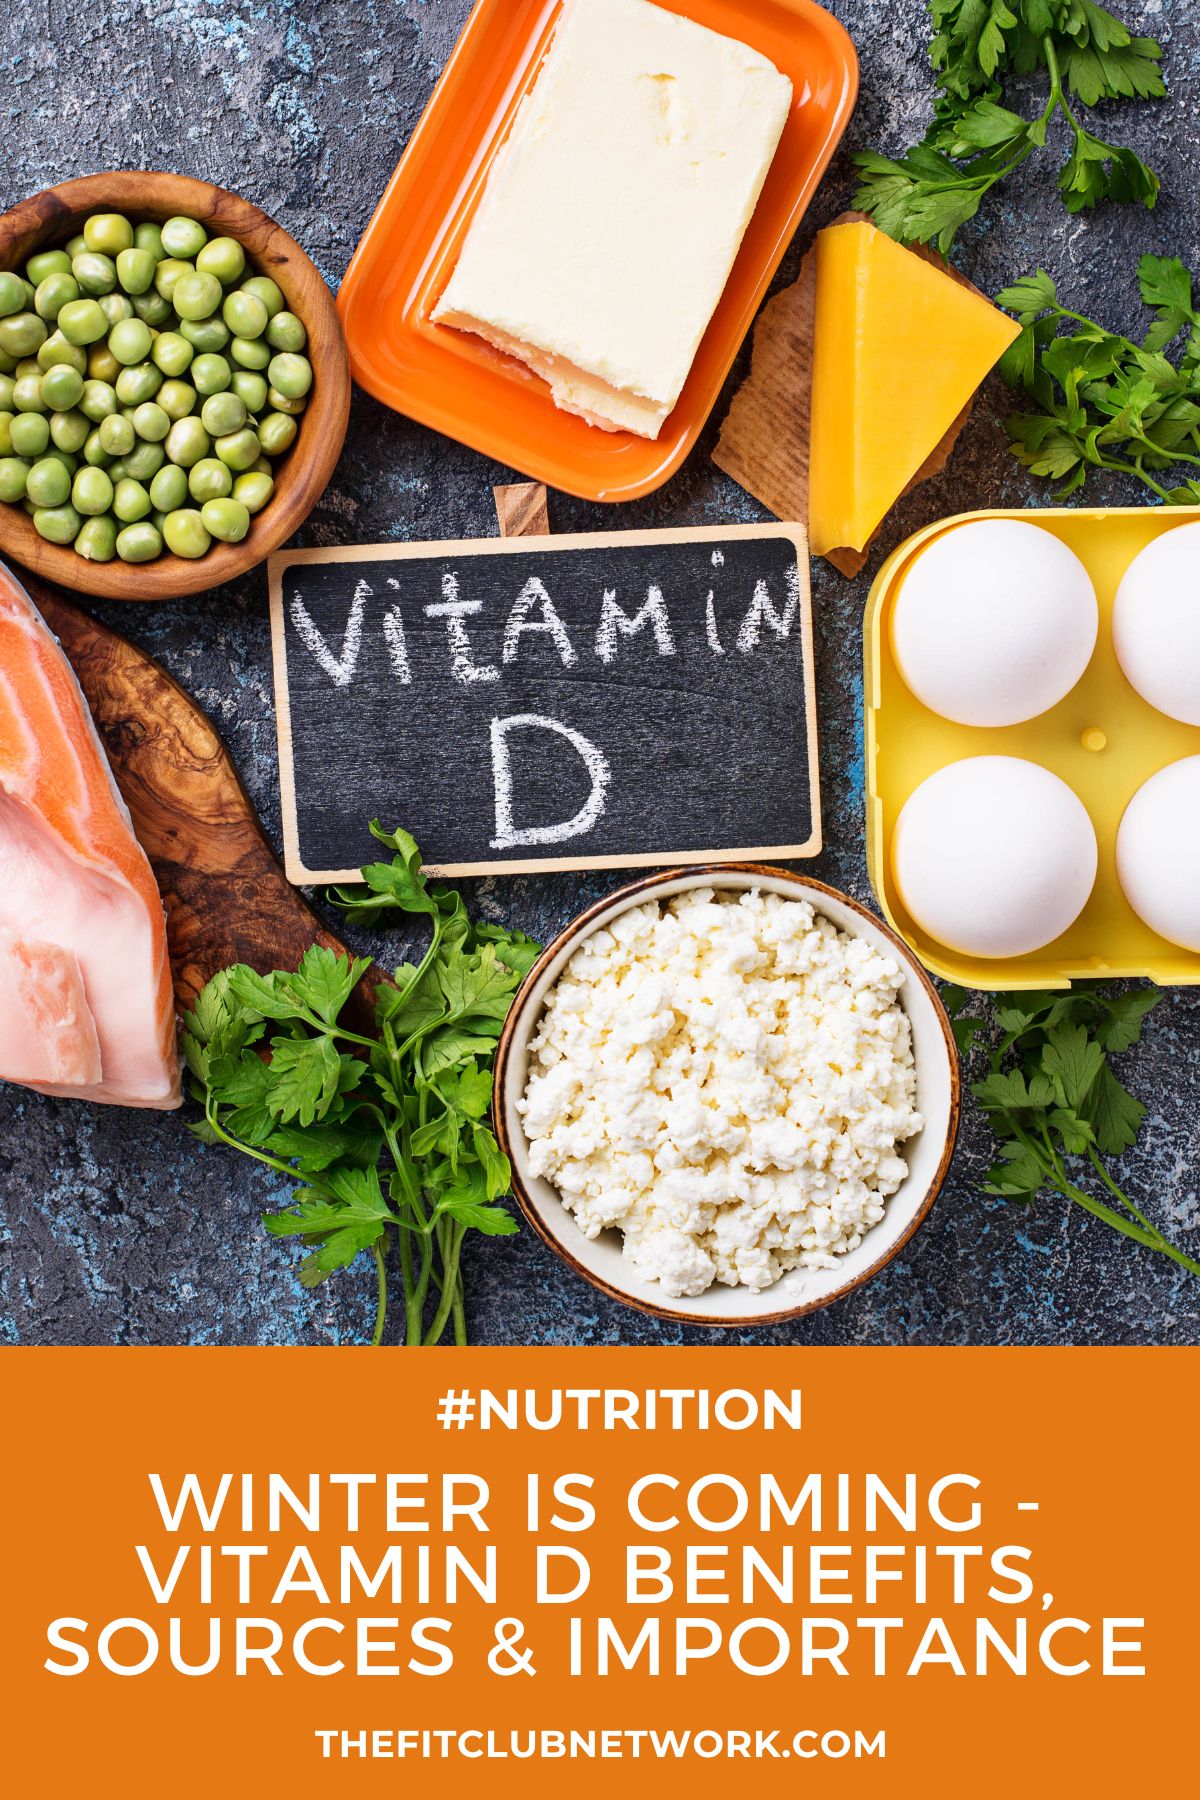 Winter is Coming - Vitamin D Benefits, Sources & Importance | THEFITCLUBNETWORK.COM